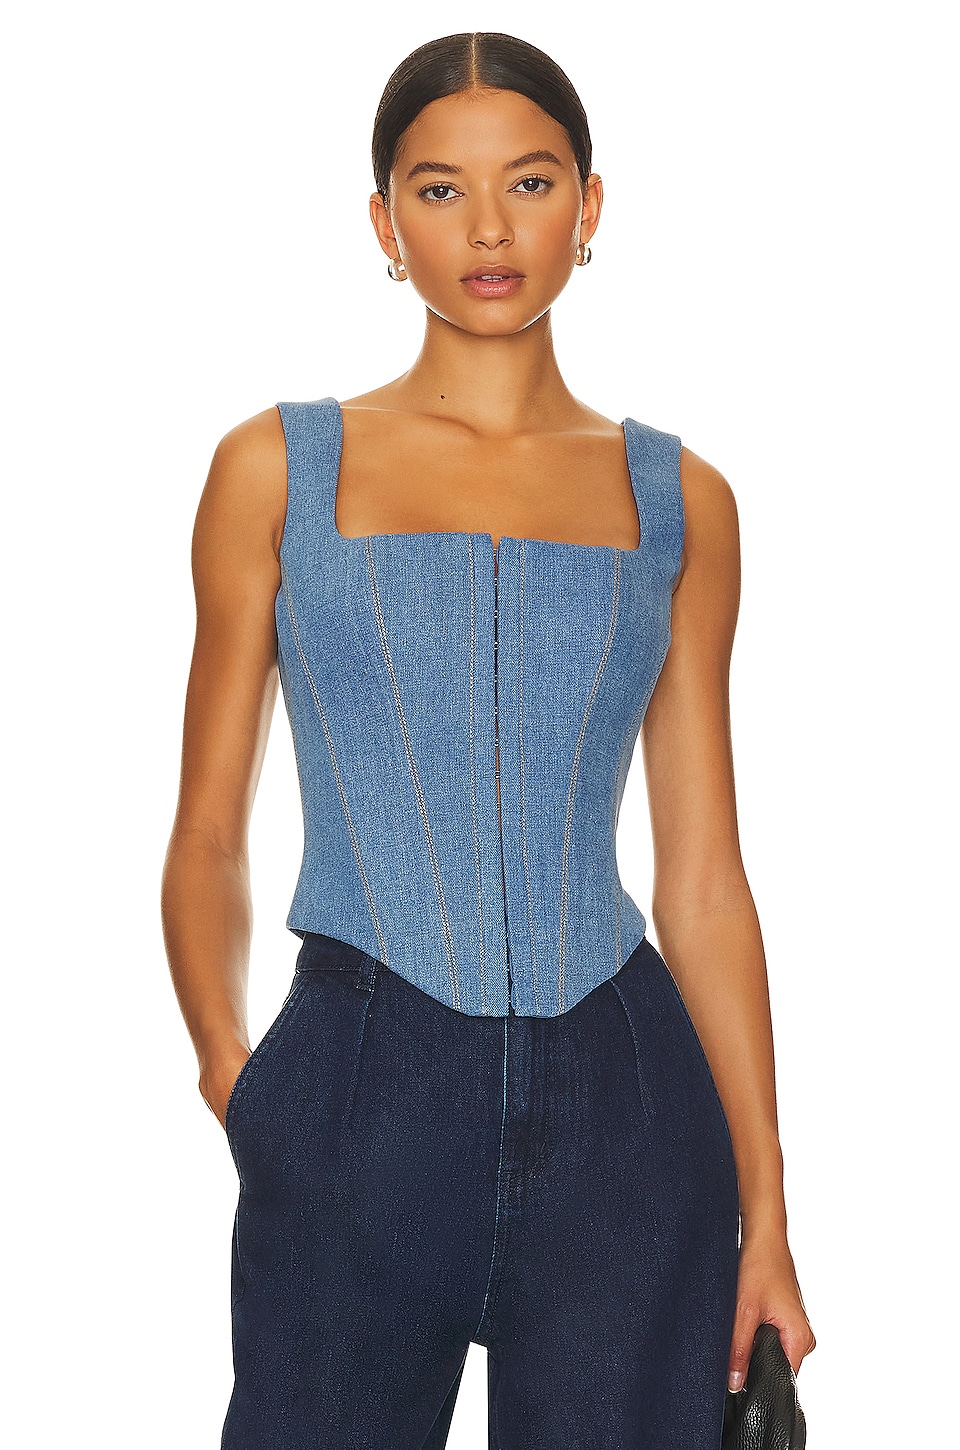 ROZIE CORSET Corset Top in electric blue - 42 | XL | 10-12 US